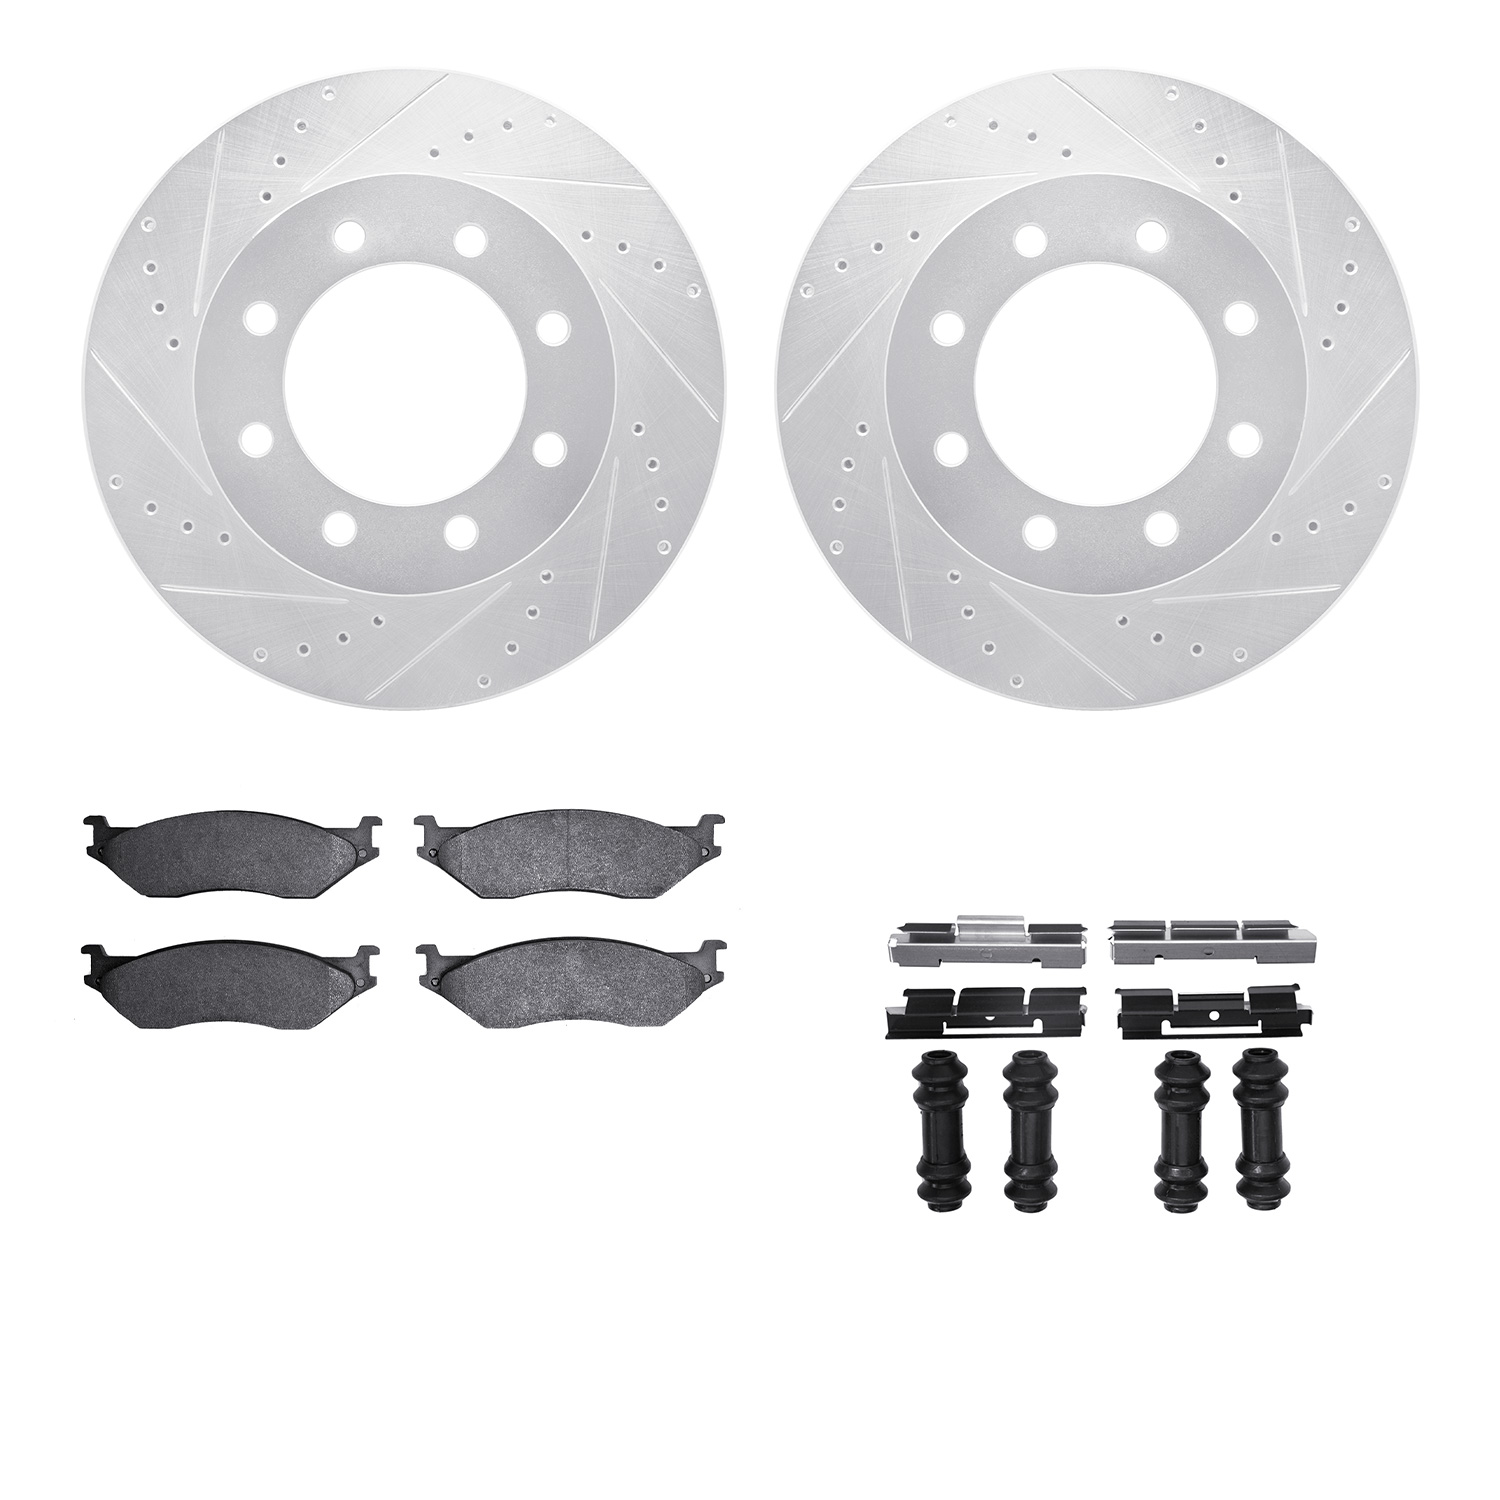 7412-54044 Drilled/Slotted Brake Rotors with Ultimate-Duty Brake Pads Kit & Hardware [Silver], 1999-2001 Ford/Lincoln/Mercury/Ma